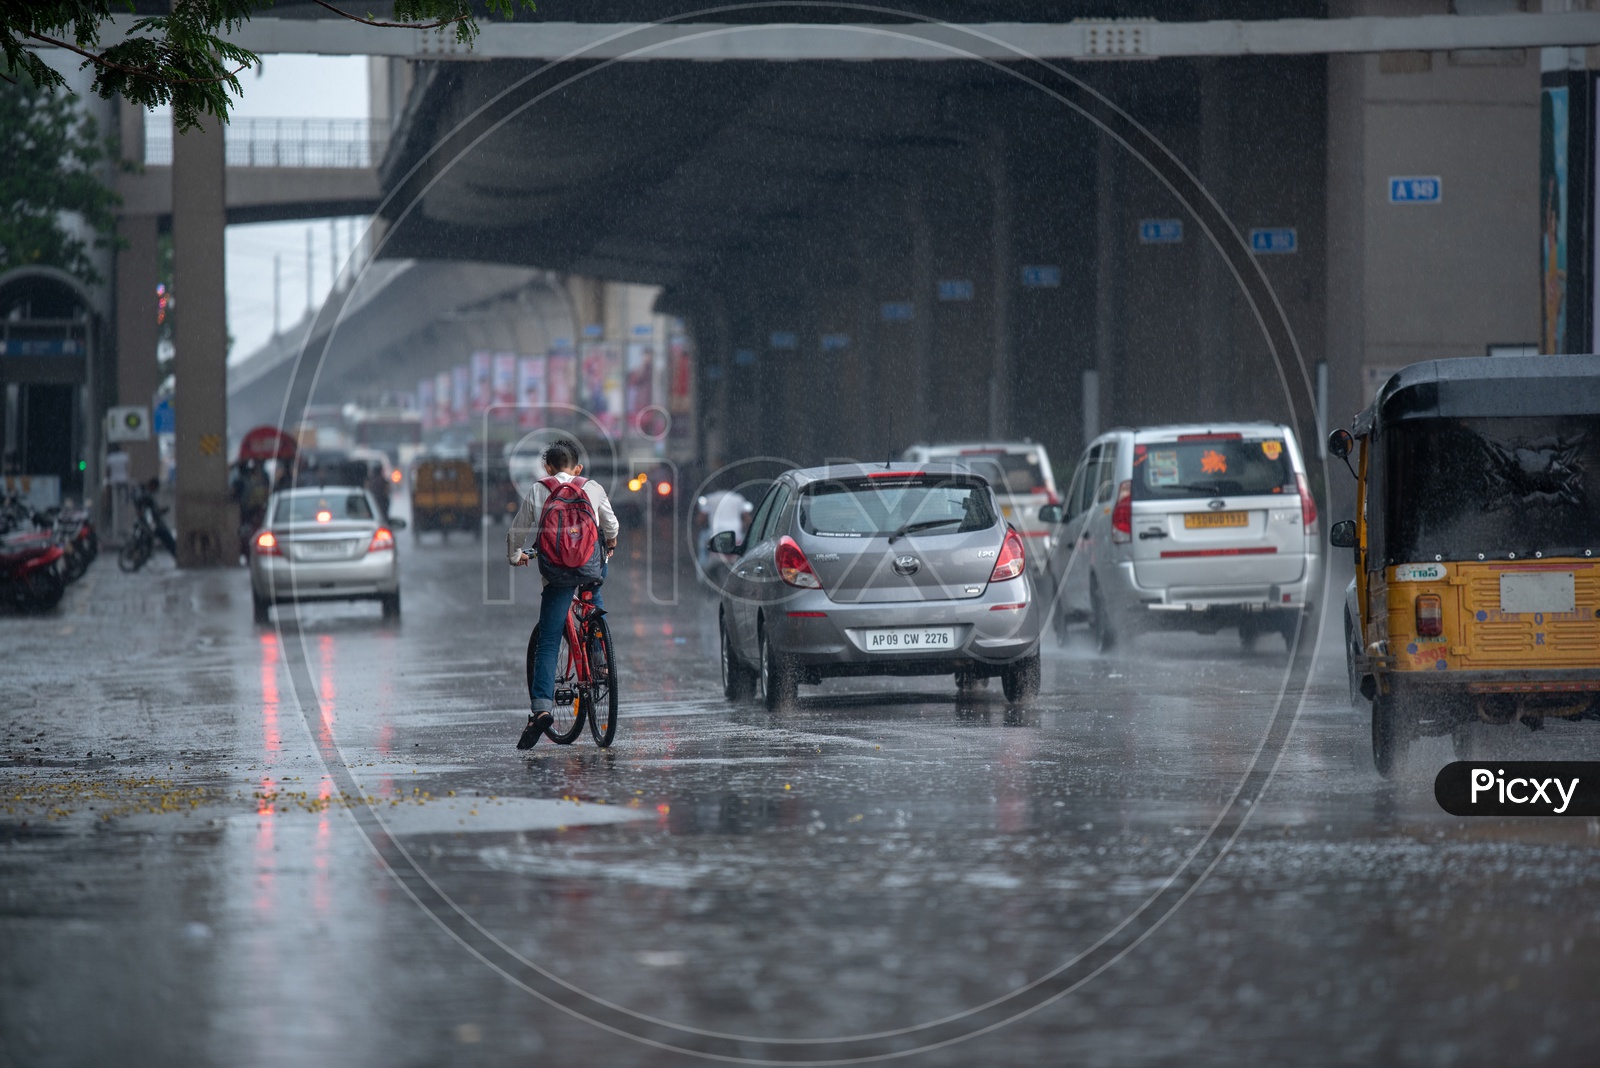 A Cyclist  on Flooded City Roads With Water Splash on a Rainy Day